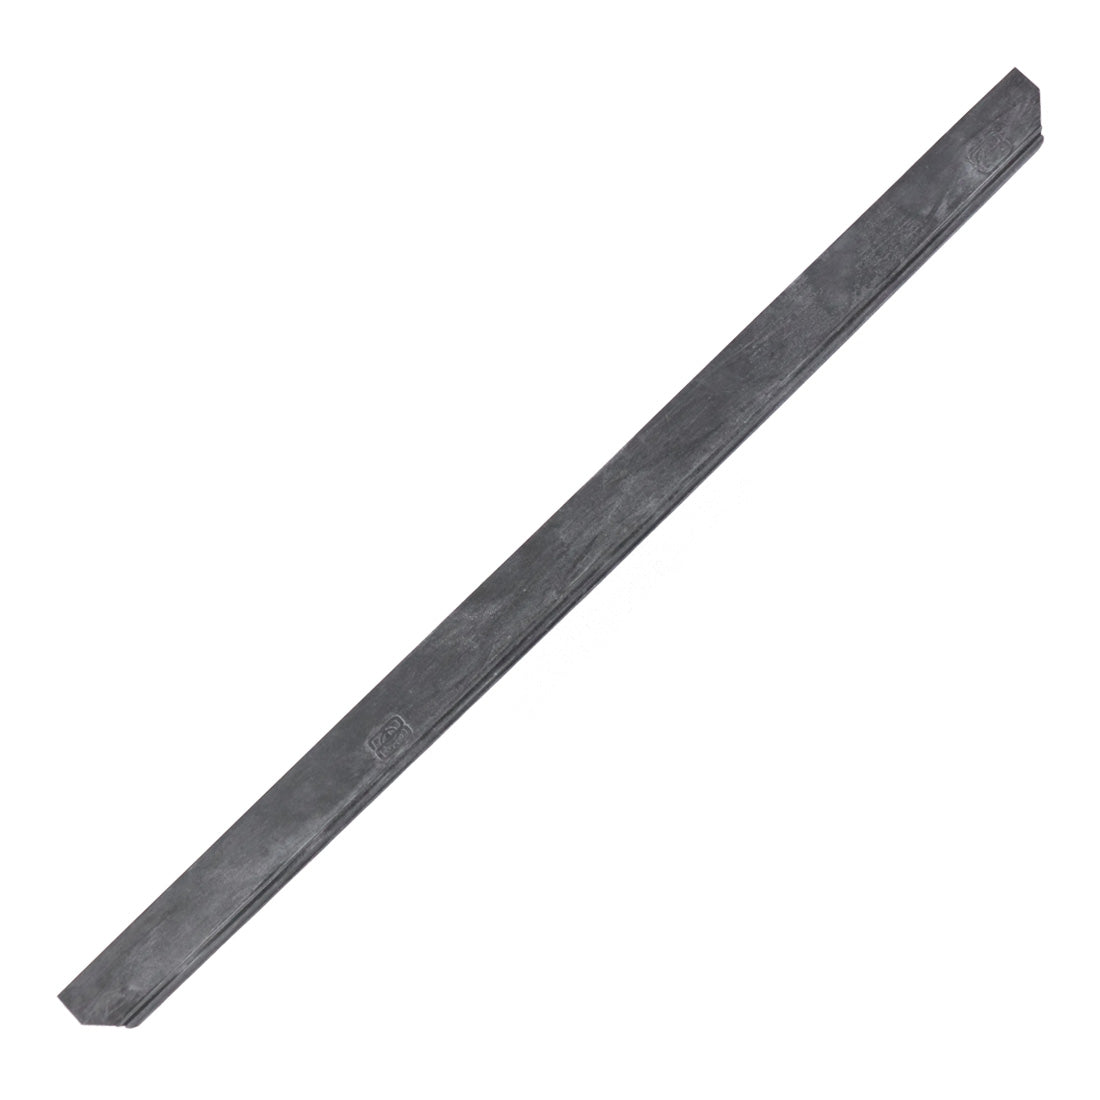 SQUEEGEE RUBBER REPLACEMENT